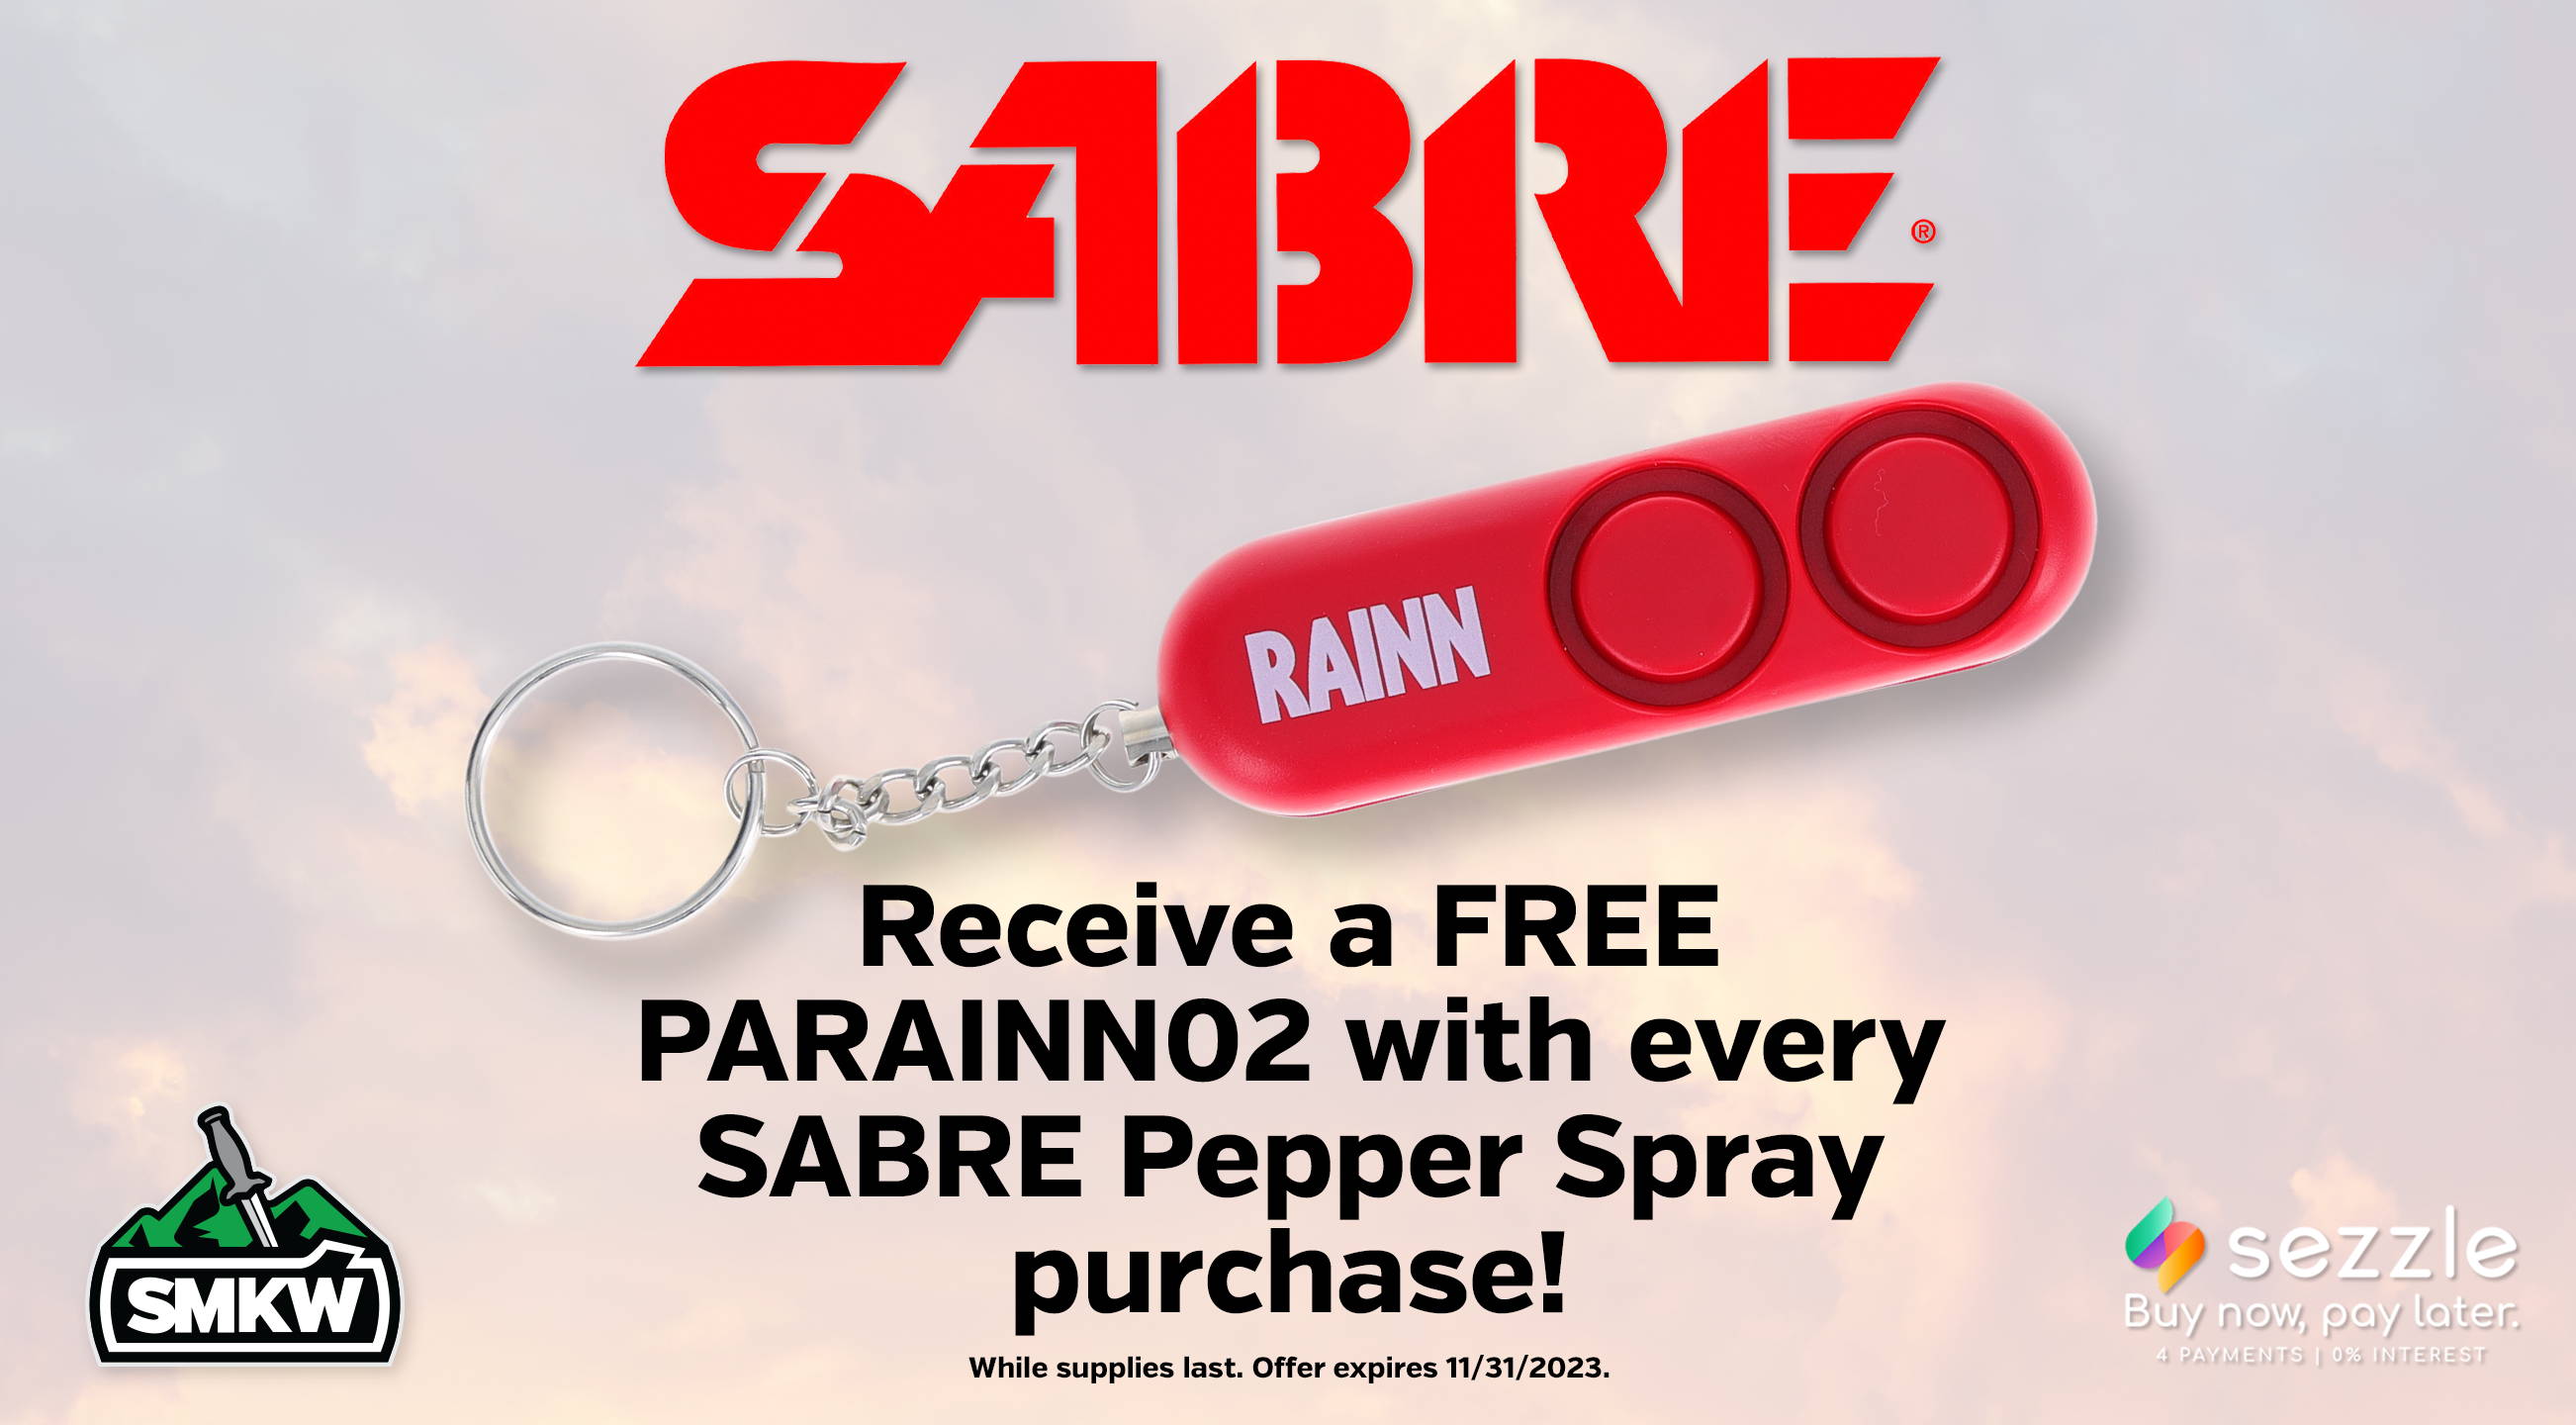 Free Rainn Personal Alarm with any Sabre Pepper Spray purchase.